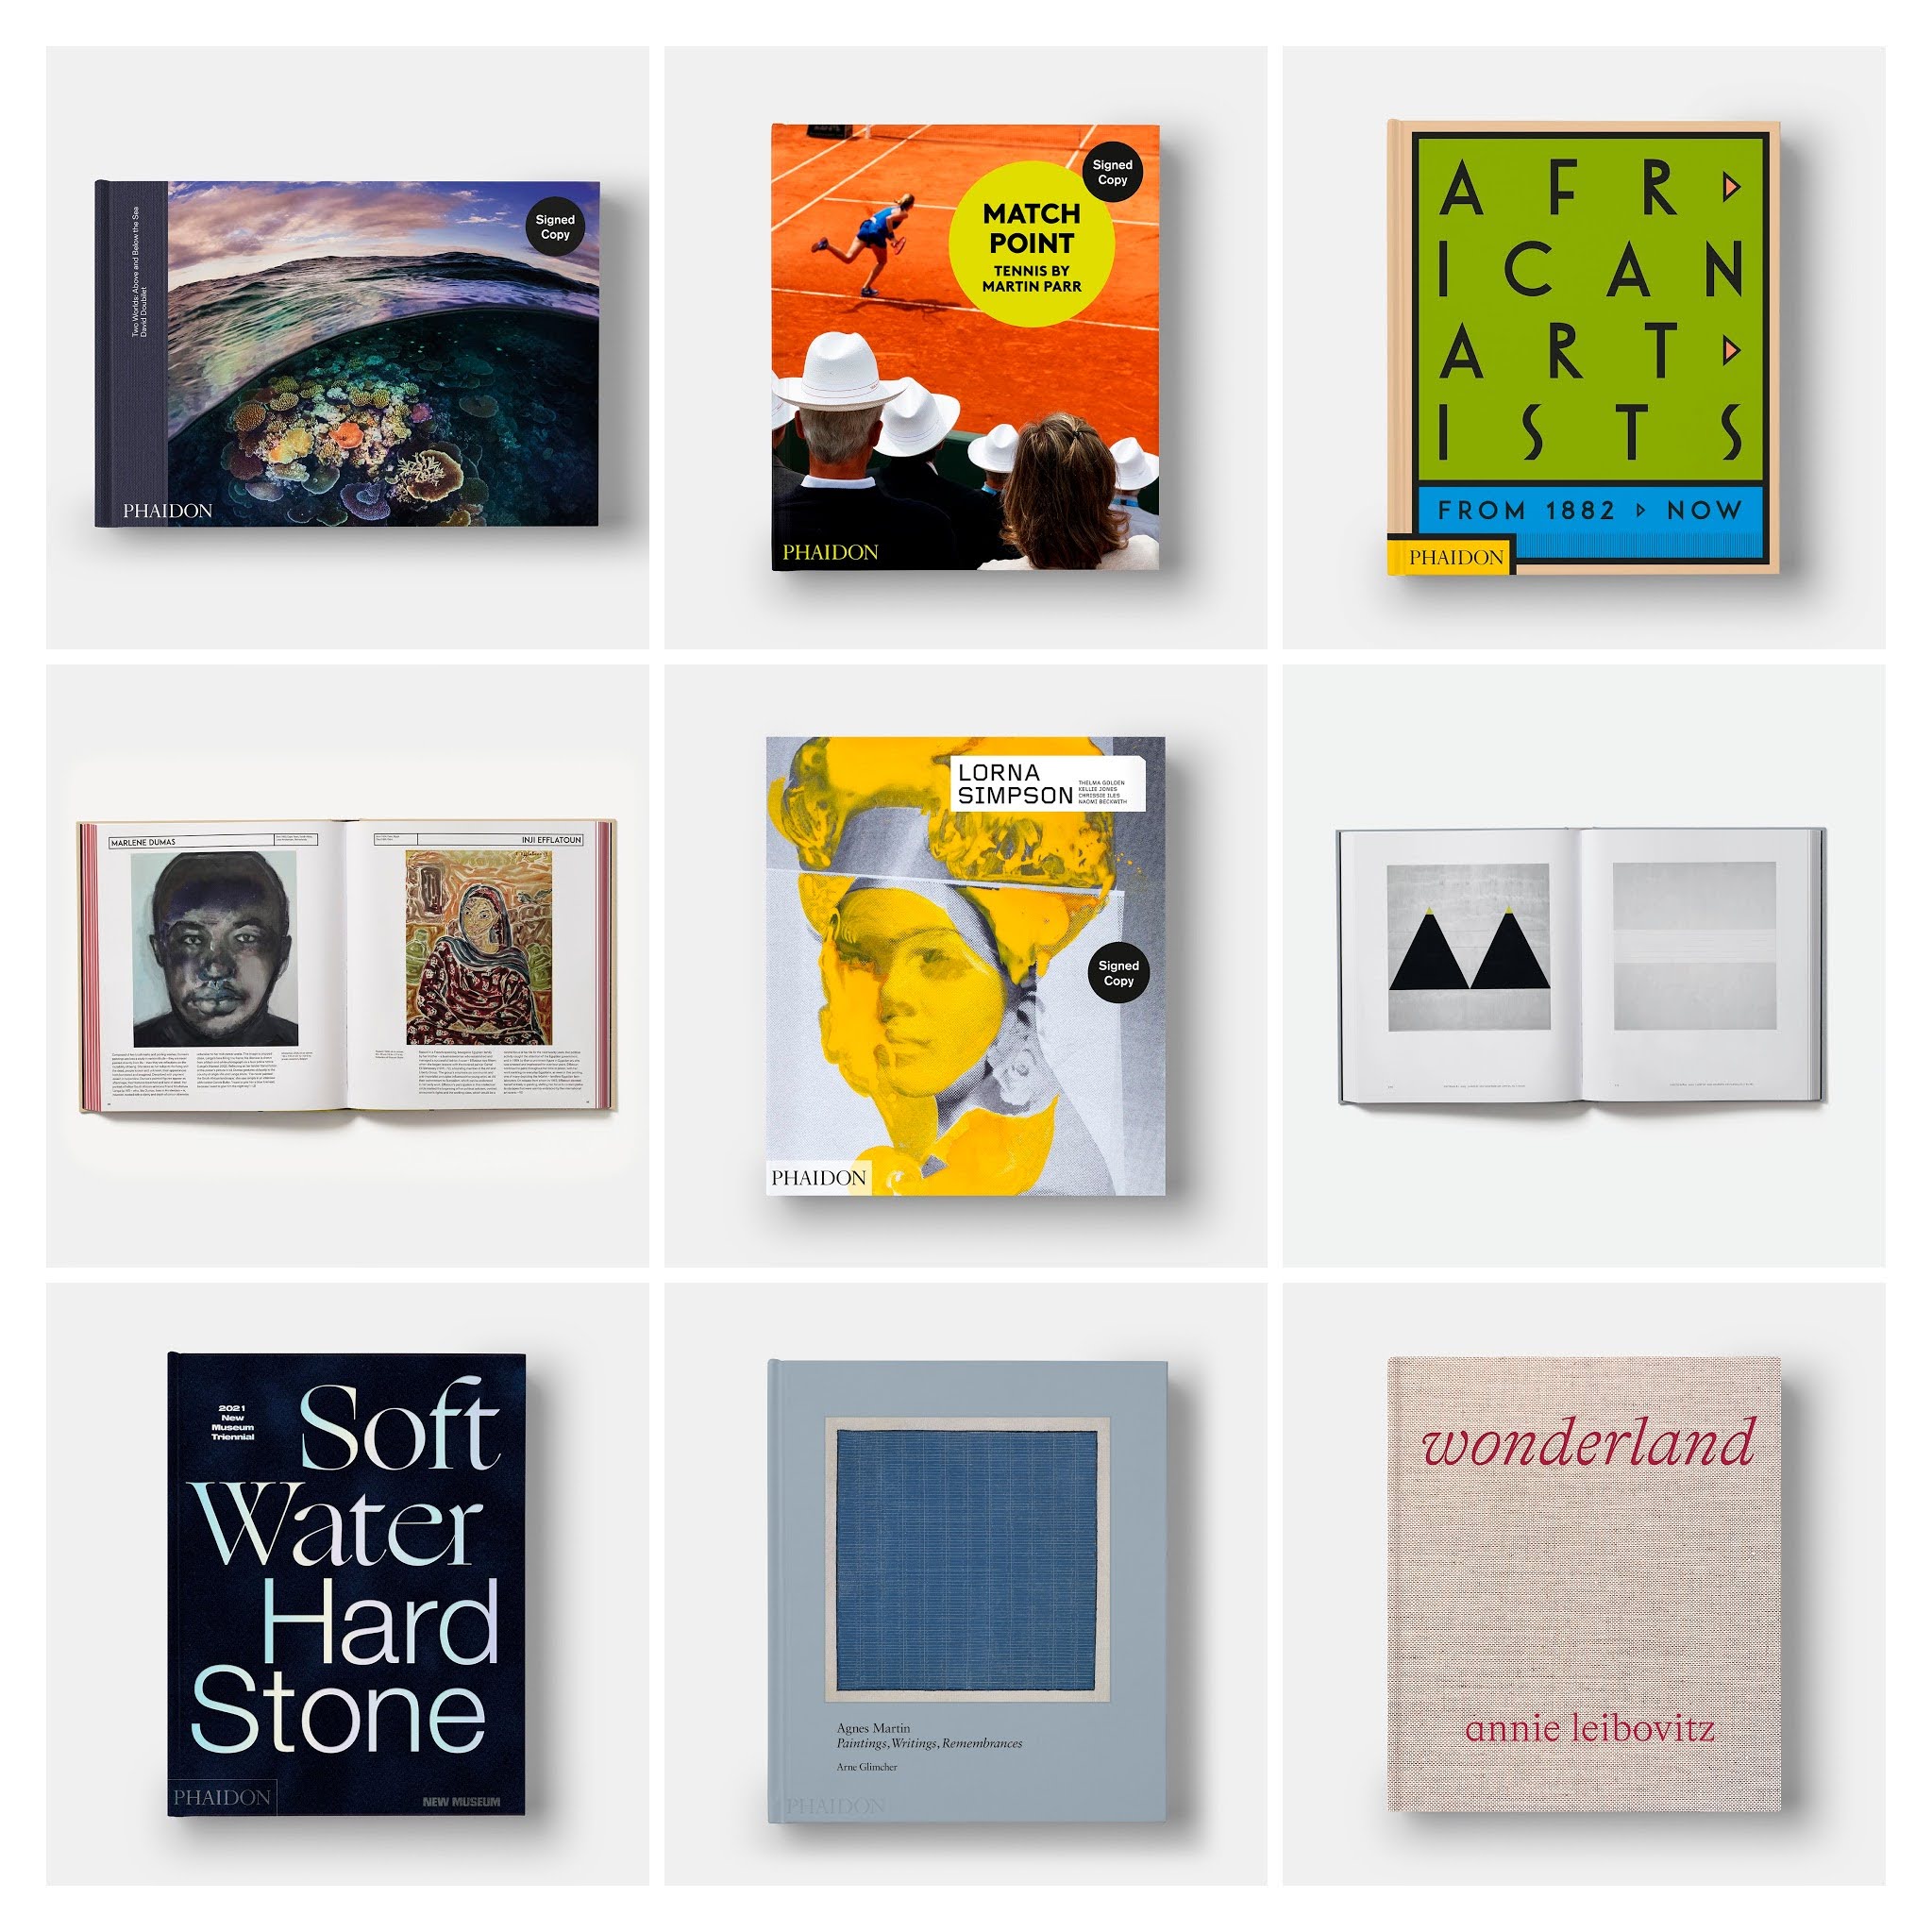 A selection of our new art and photography books. From top left, reading across: Two Worlds: Above and Below the Sea ; Match Point; African Artists; a spread from African Artists; Lorna Simpson; a spread from Agnes Martin; Soft Water, Hard Stone; Agnes Martin; Annie Leibovitz: Wonderland